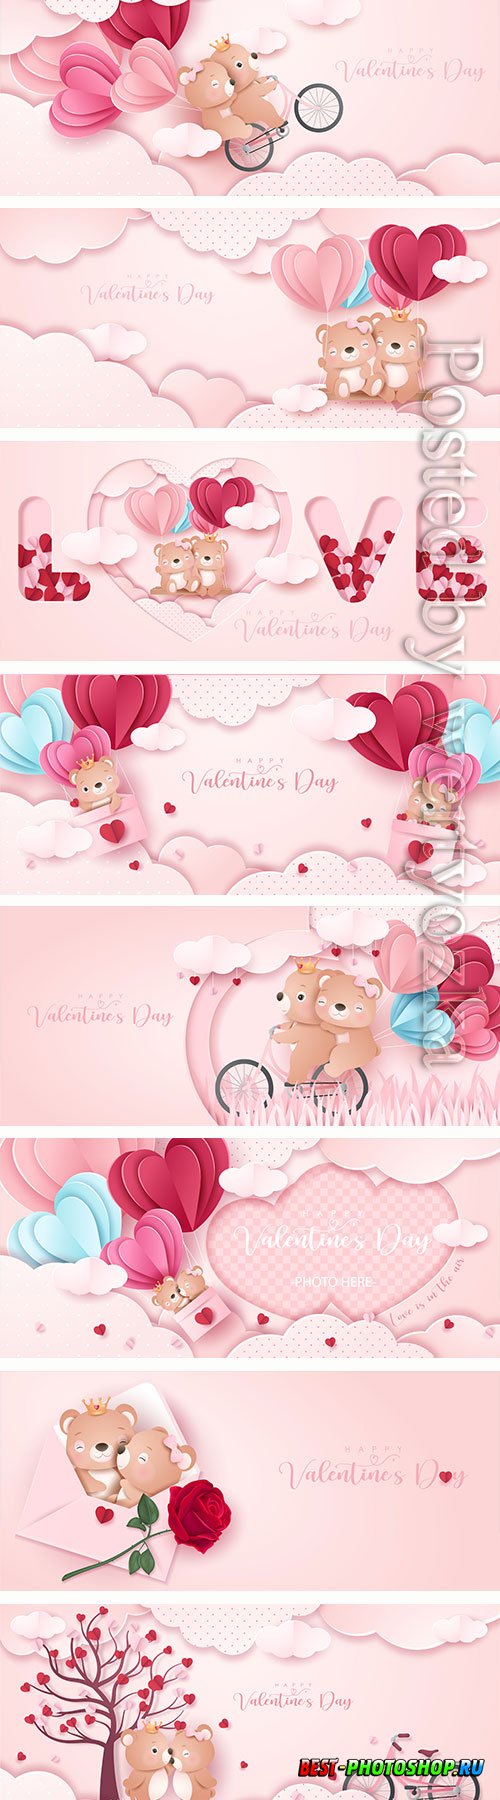 Cute doodle bear for valentines day in paper style banner